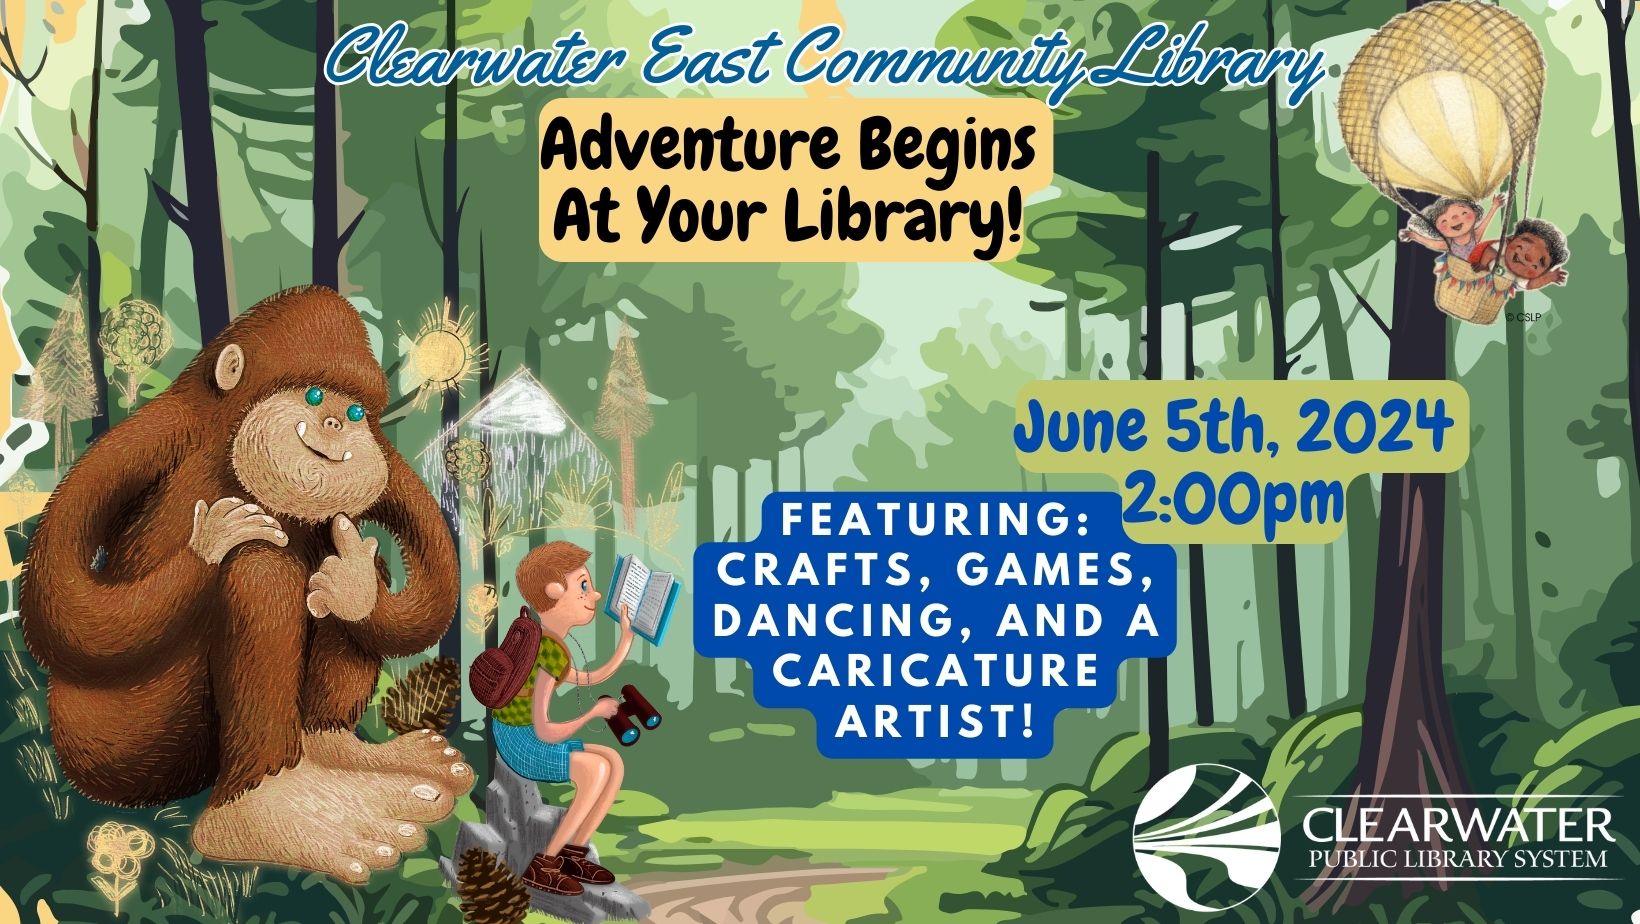 Summer Kick off June 5th, Big Foot Reading, Dancing with Caricature Artist 